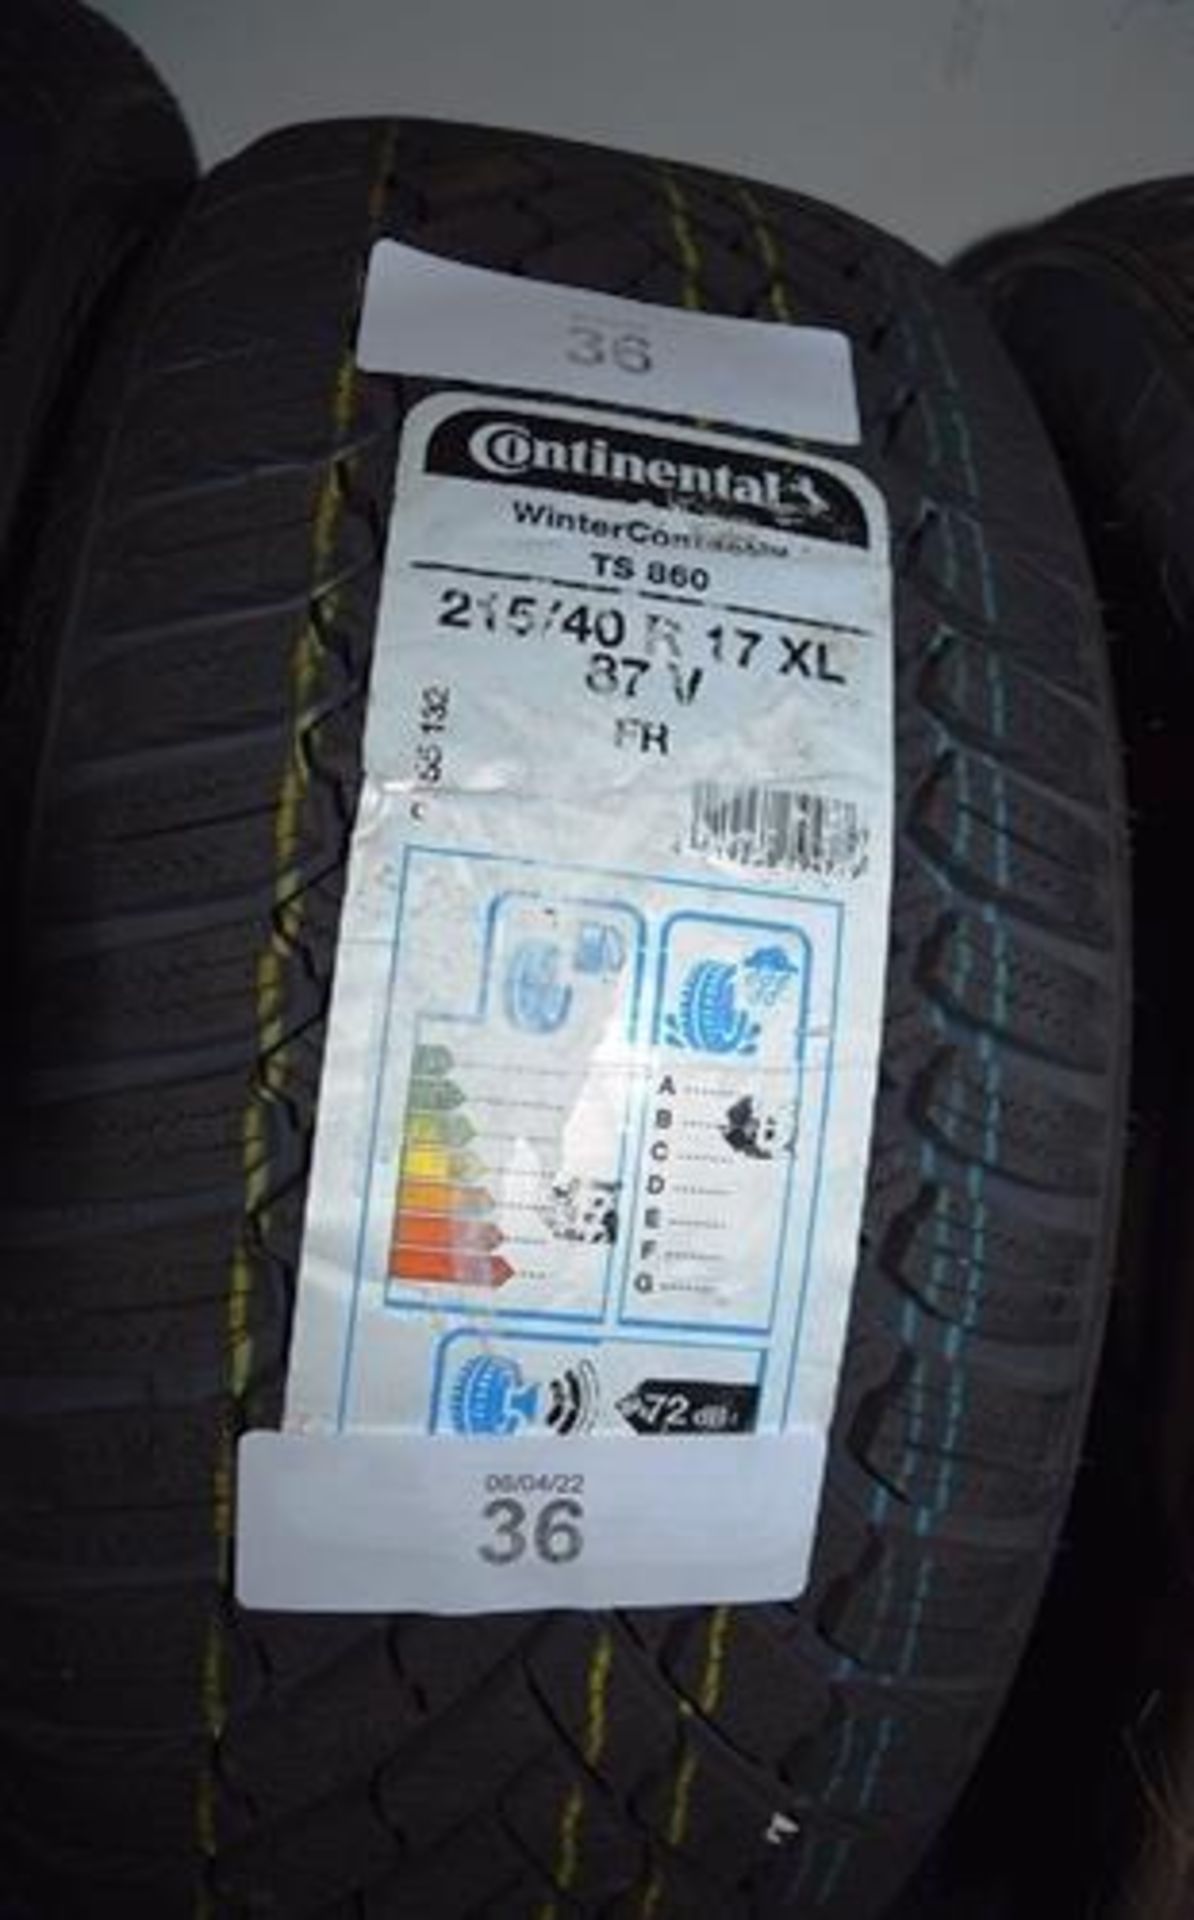 1 x Continental Winter Contact TS 860 tyre, size 215/40XR17 87V FR XL - New with label (GS4)